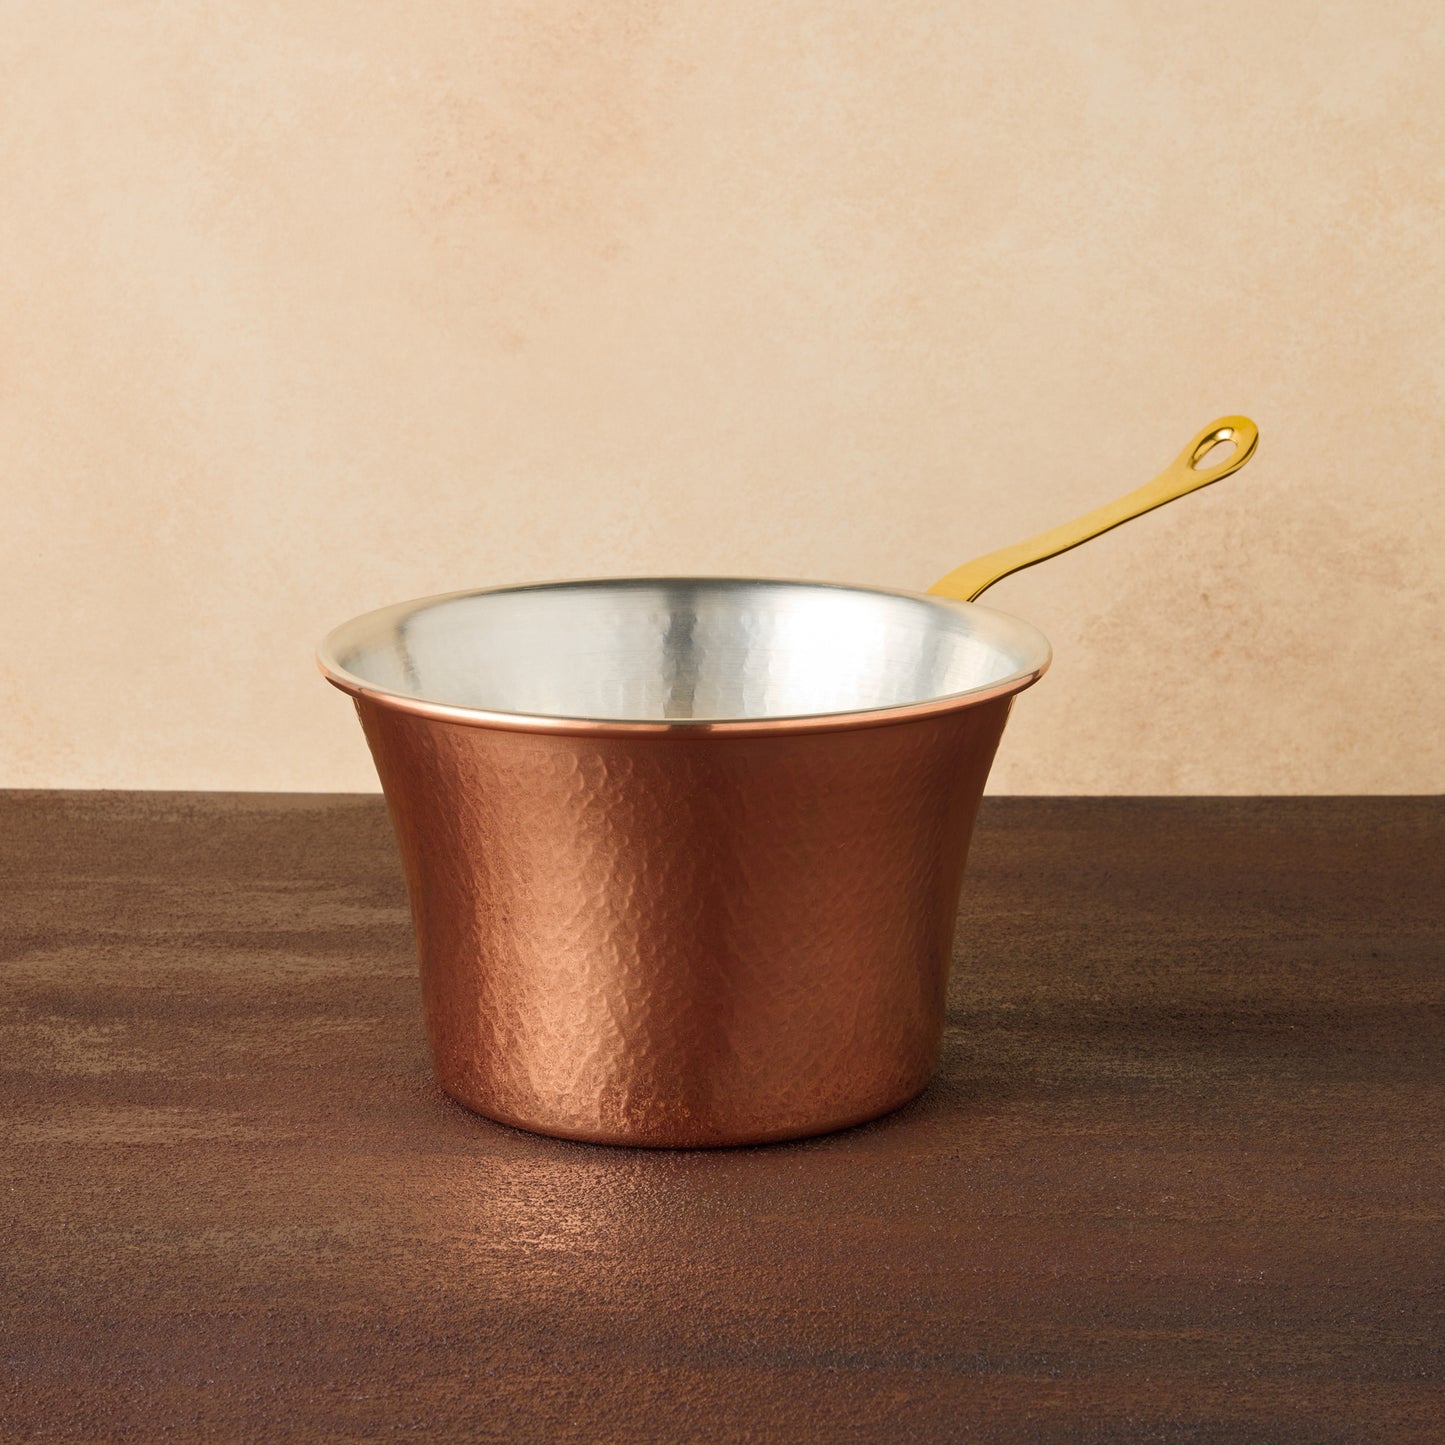 Ruffoni copper polenta pot is crafted in pure copper and tin lined by hand over fired